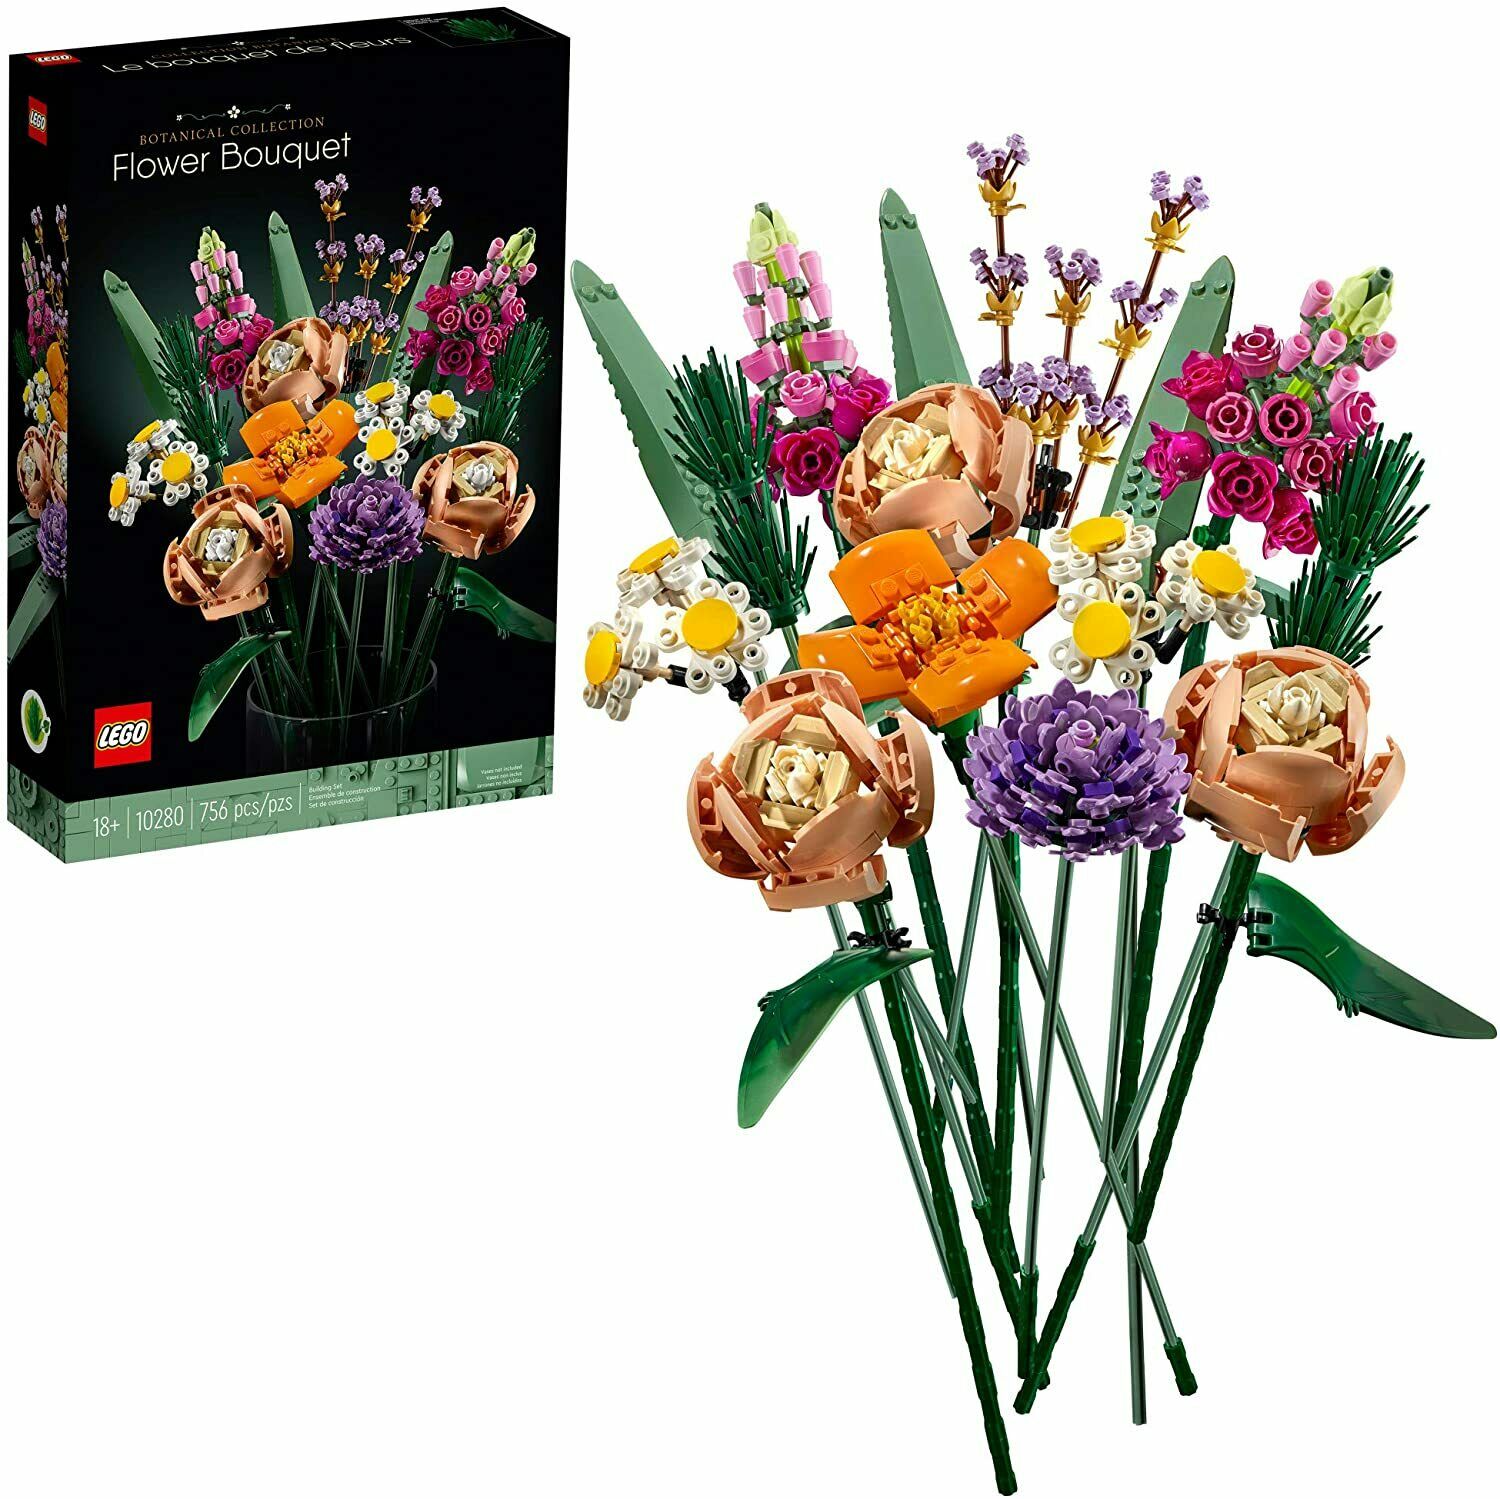 *BRAND NEW* Lego Botanical Collection | Flower Bouquet | 10280 | IN STOCK!